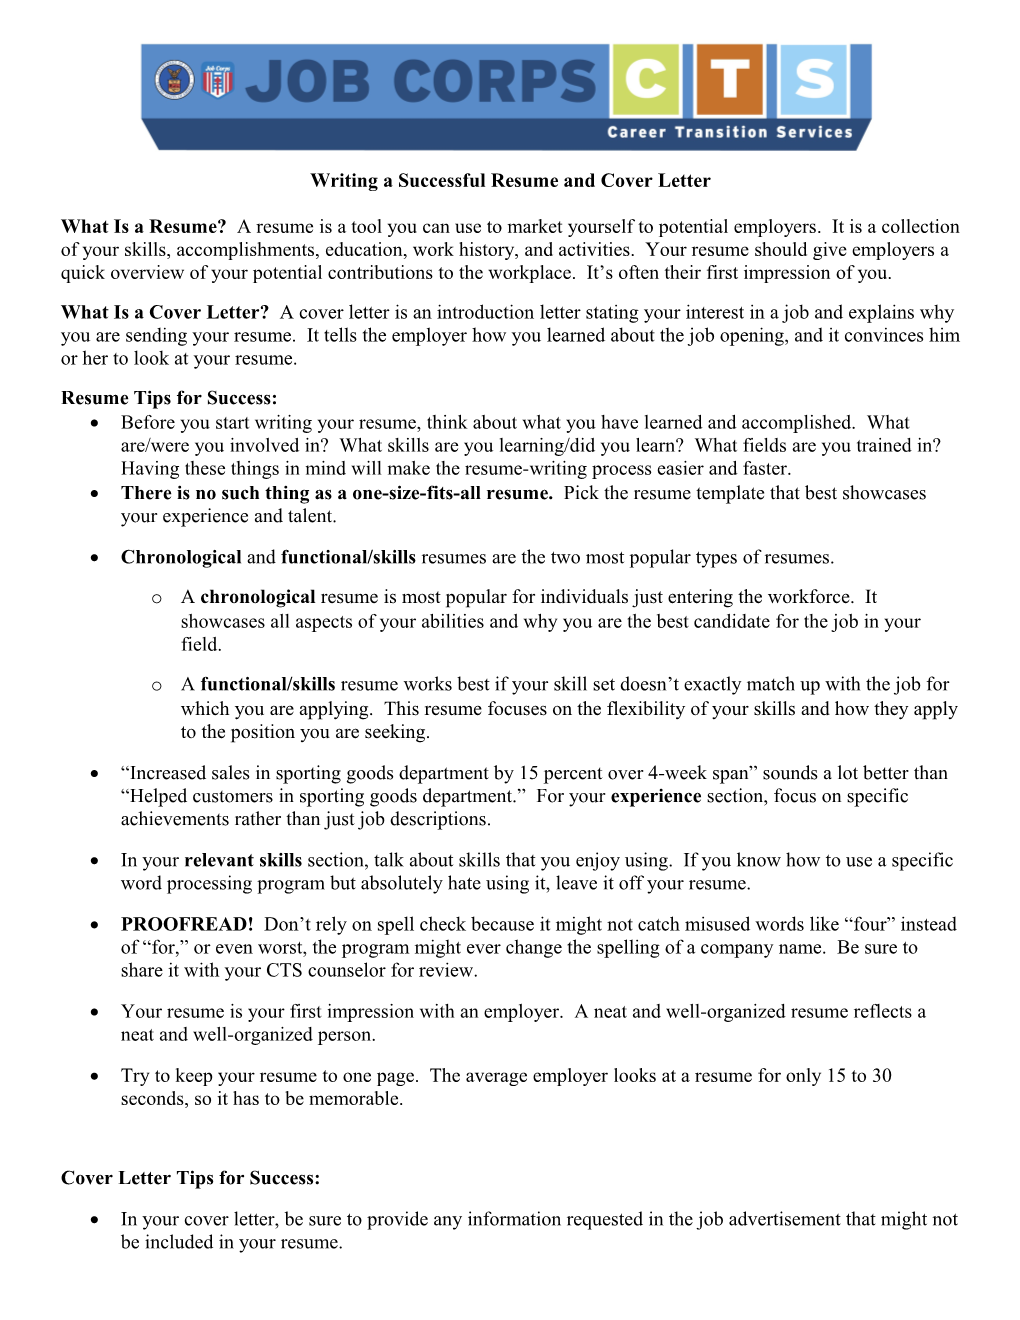 Writing a Successful Cover Letter and Resume